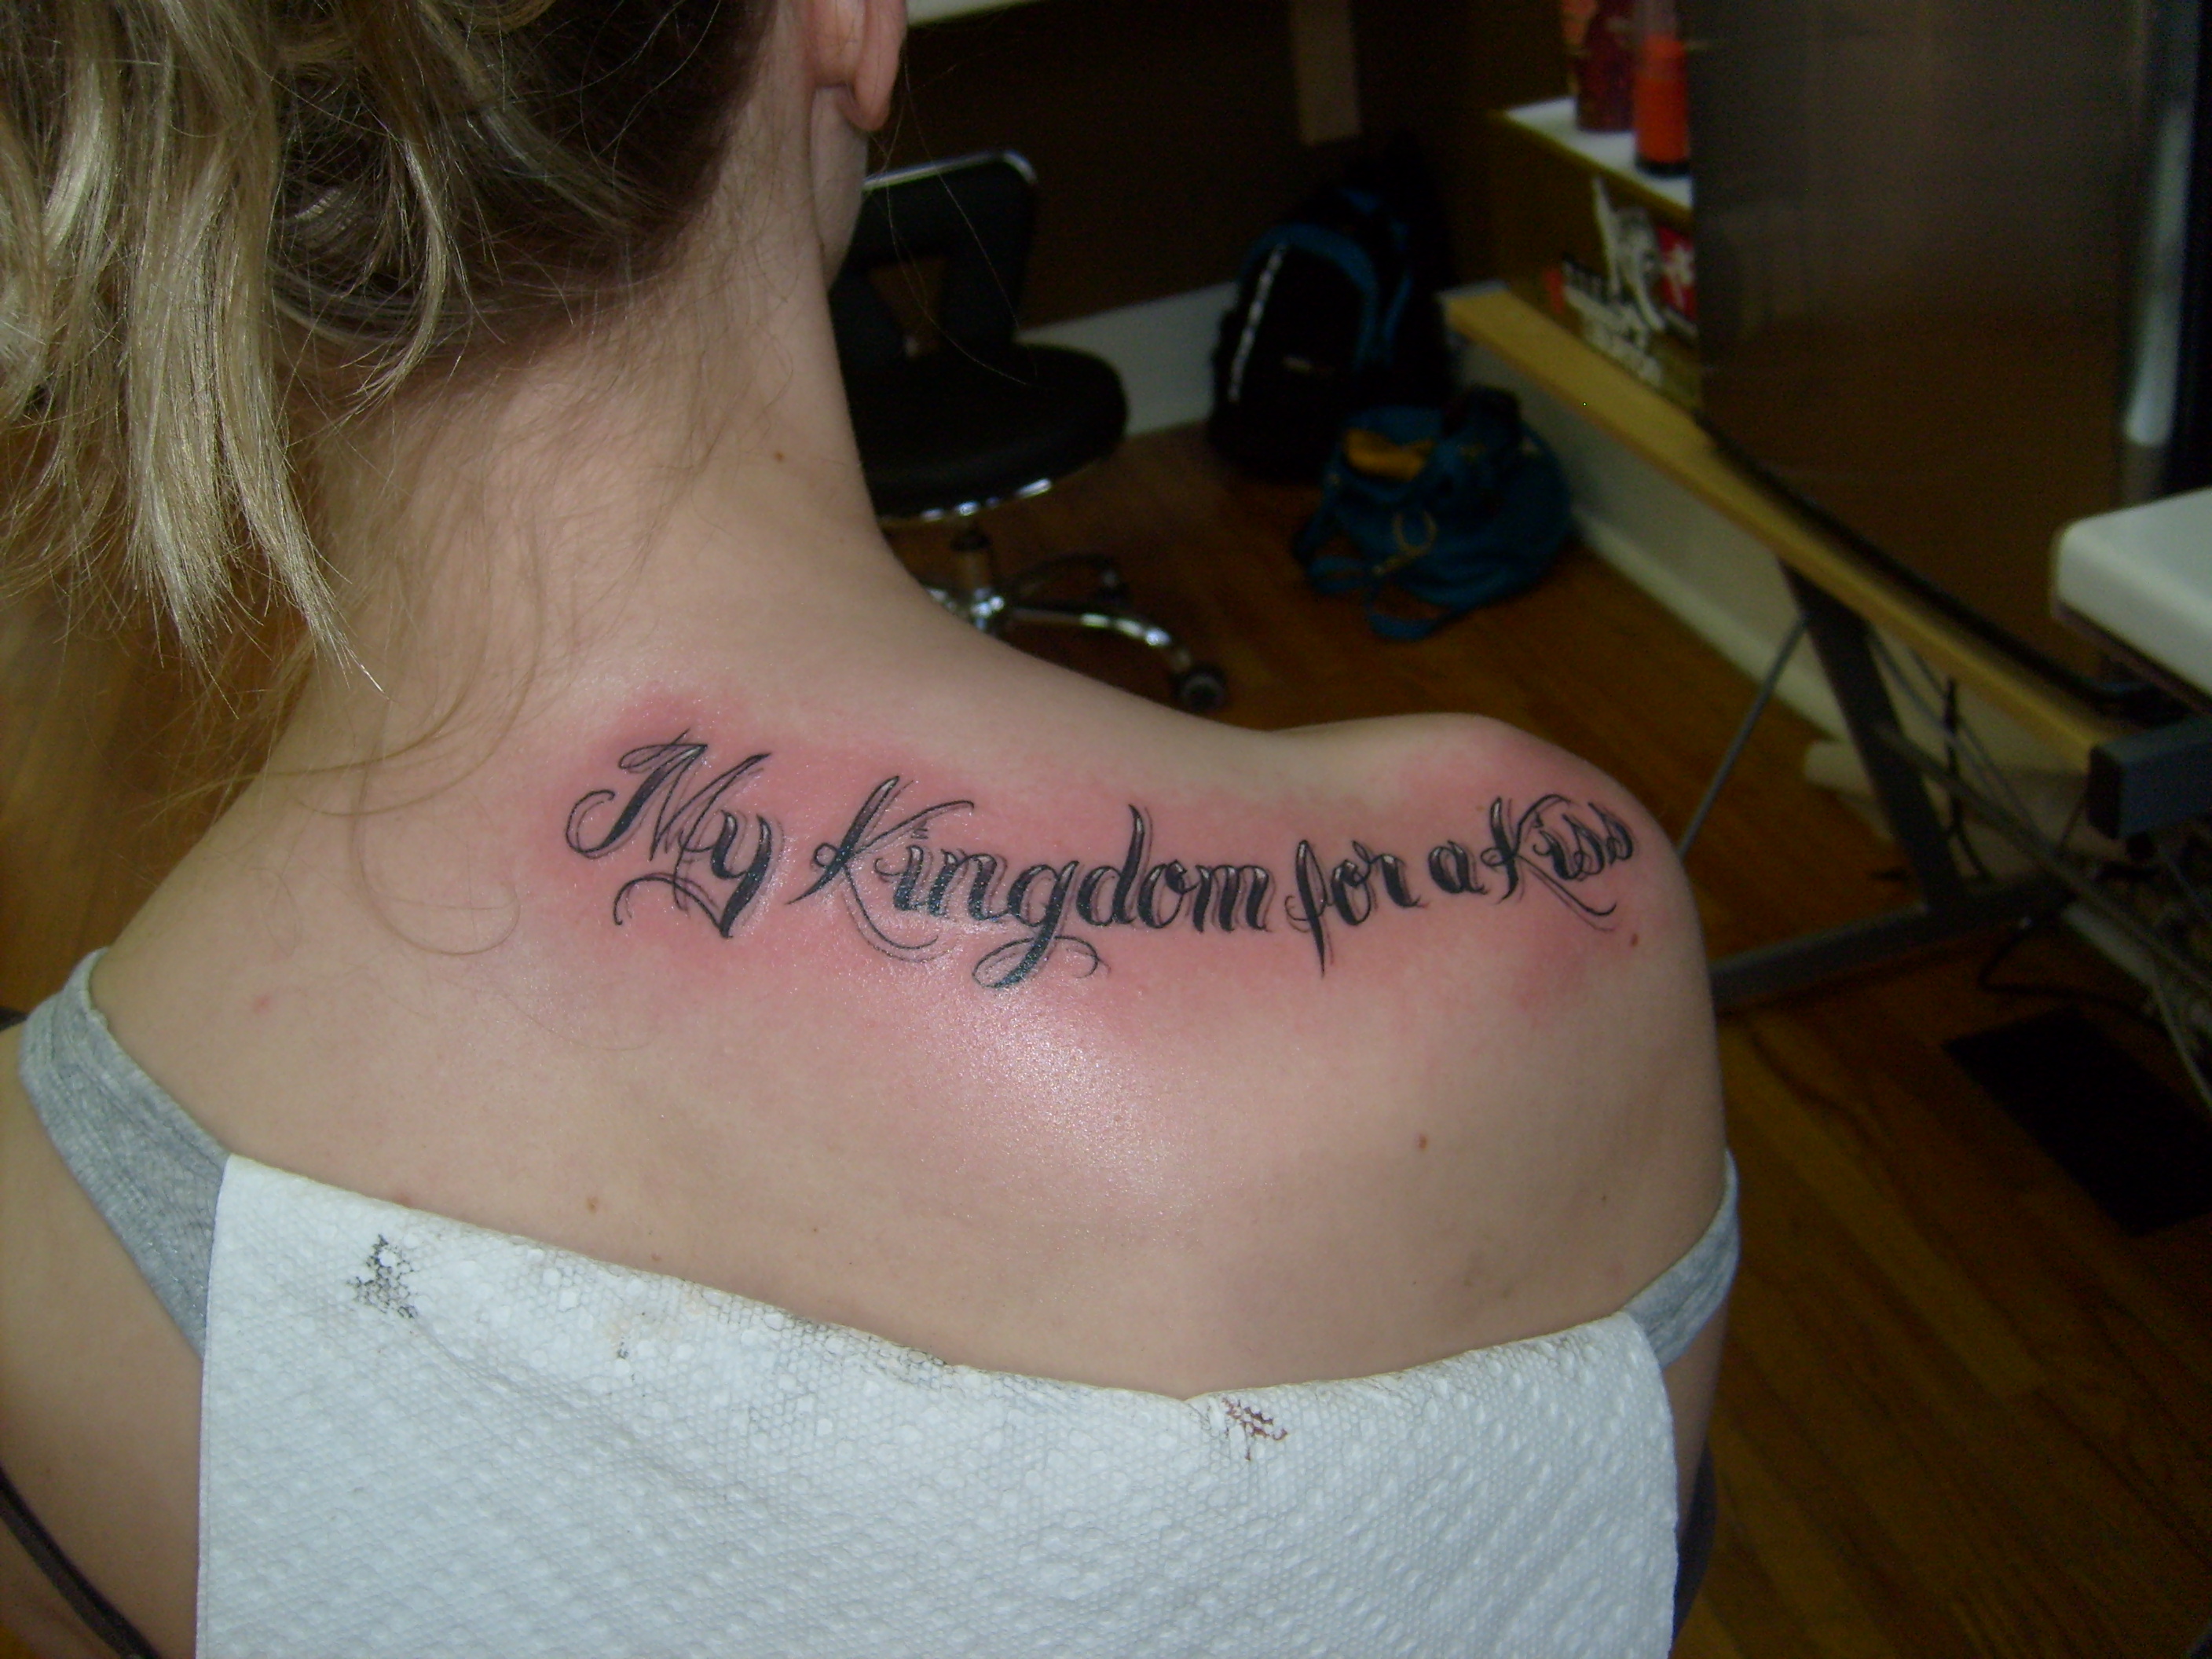 My kingdom for a kiss upon her shoulder - Jeff Buckley - Post by